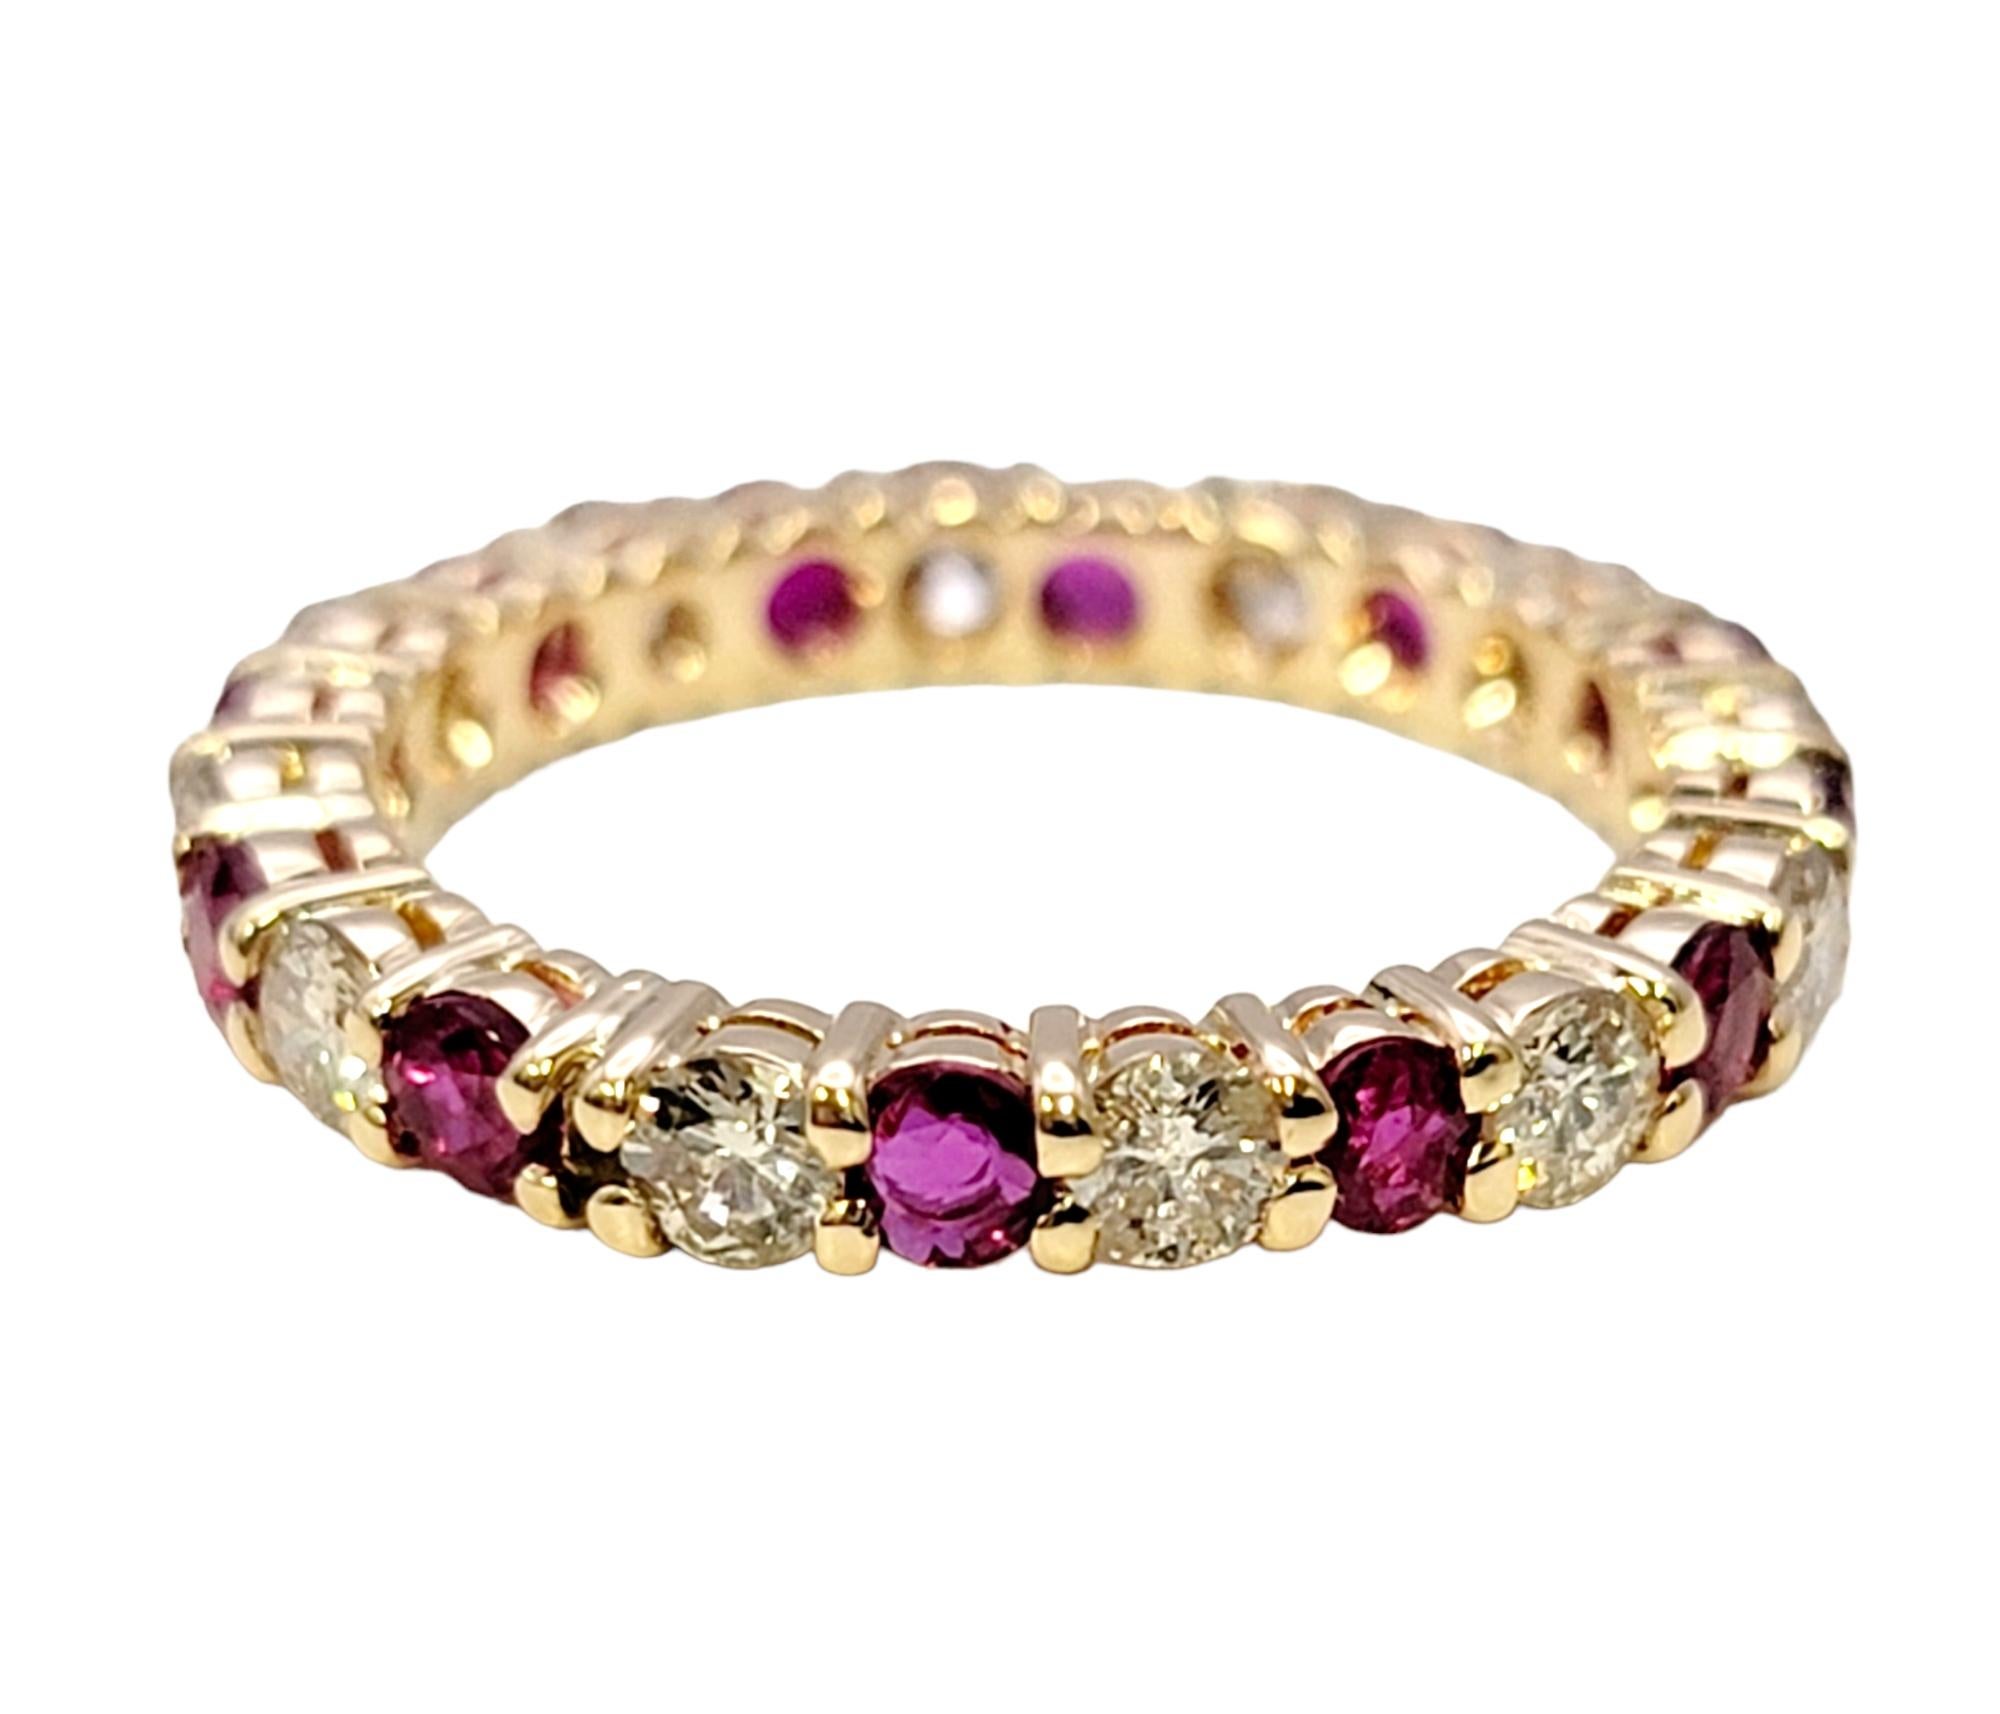 Ring size: 6

This beautiful alternating diamond and ruby eternity band ring is a true testament to elegance and timeless allure. Meticulously crafted in radiant yellow gold, this ring features a breathtaking combination of dazzling white diamonds